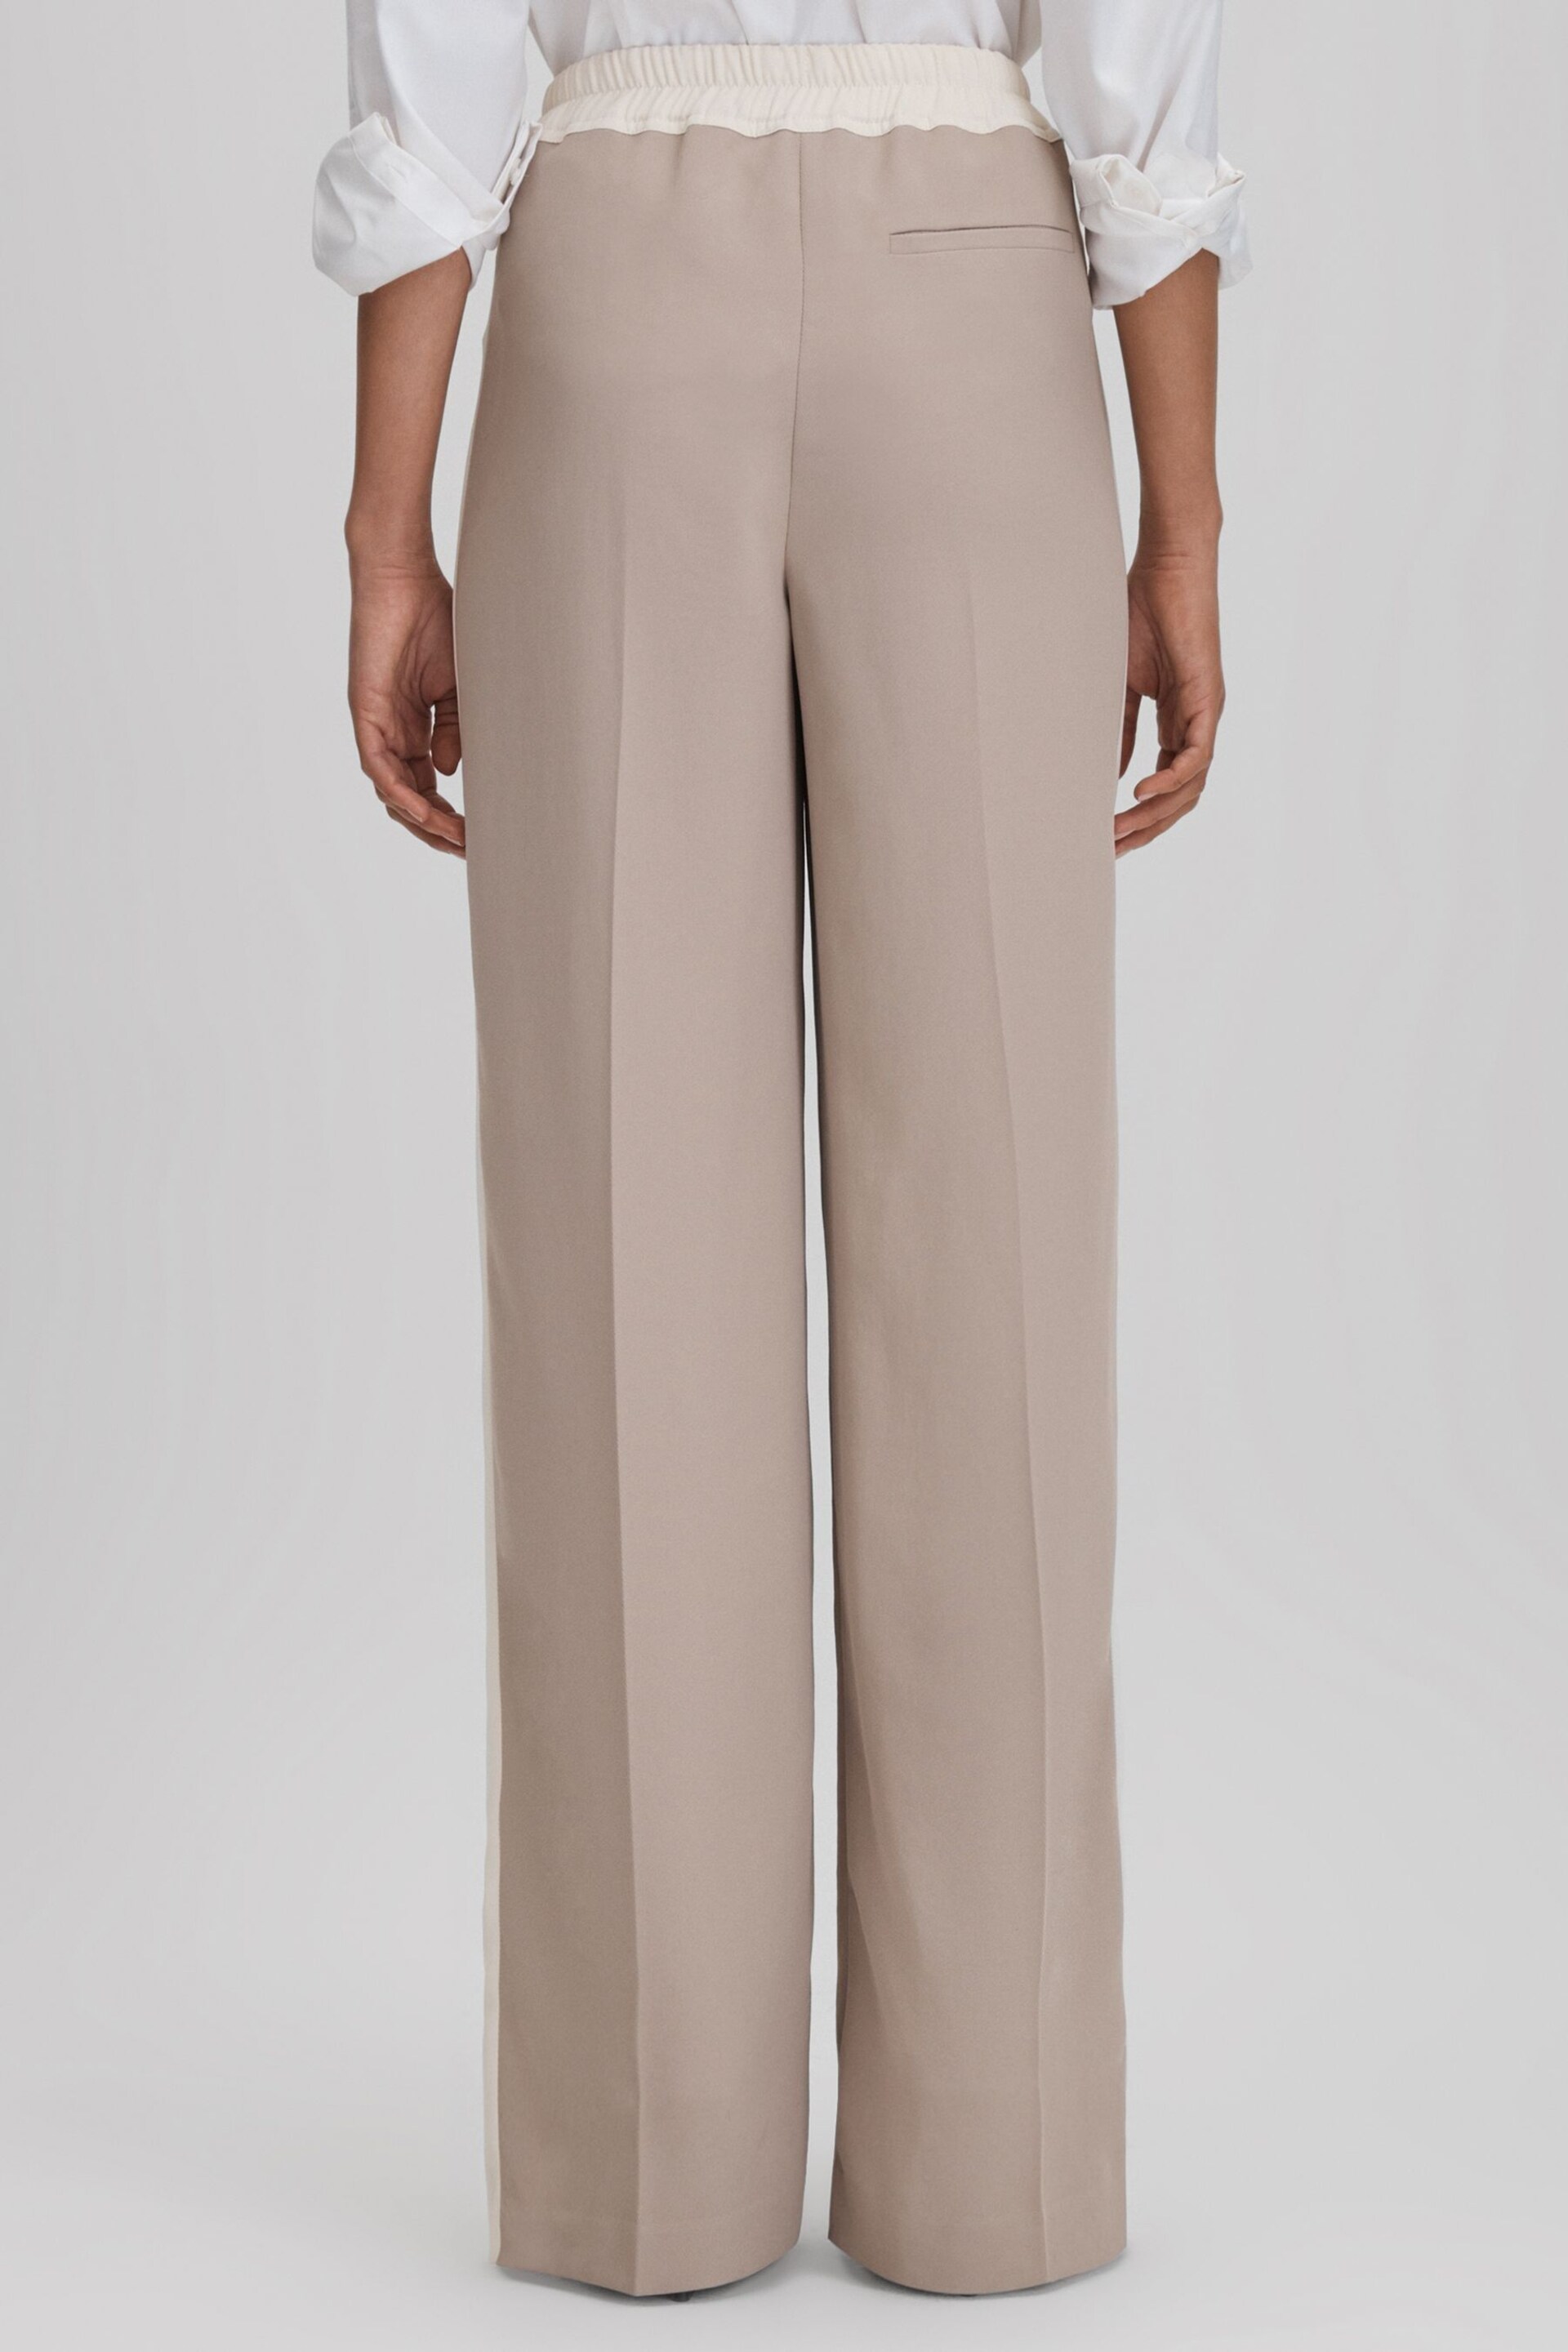 Reiss Natural May Wide Petite Wide Leg Contrast Stripe Drawstring Trousers - Image 5 of 7